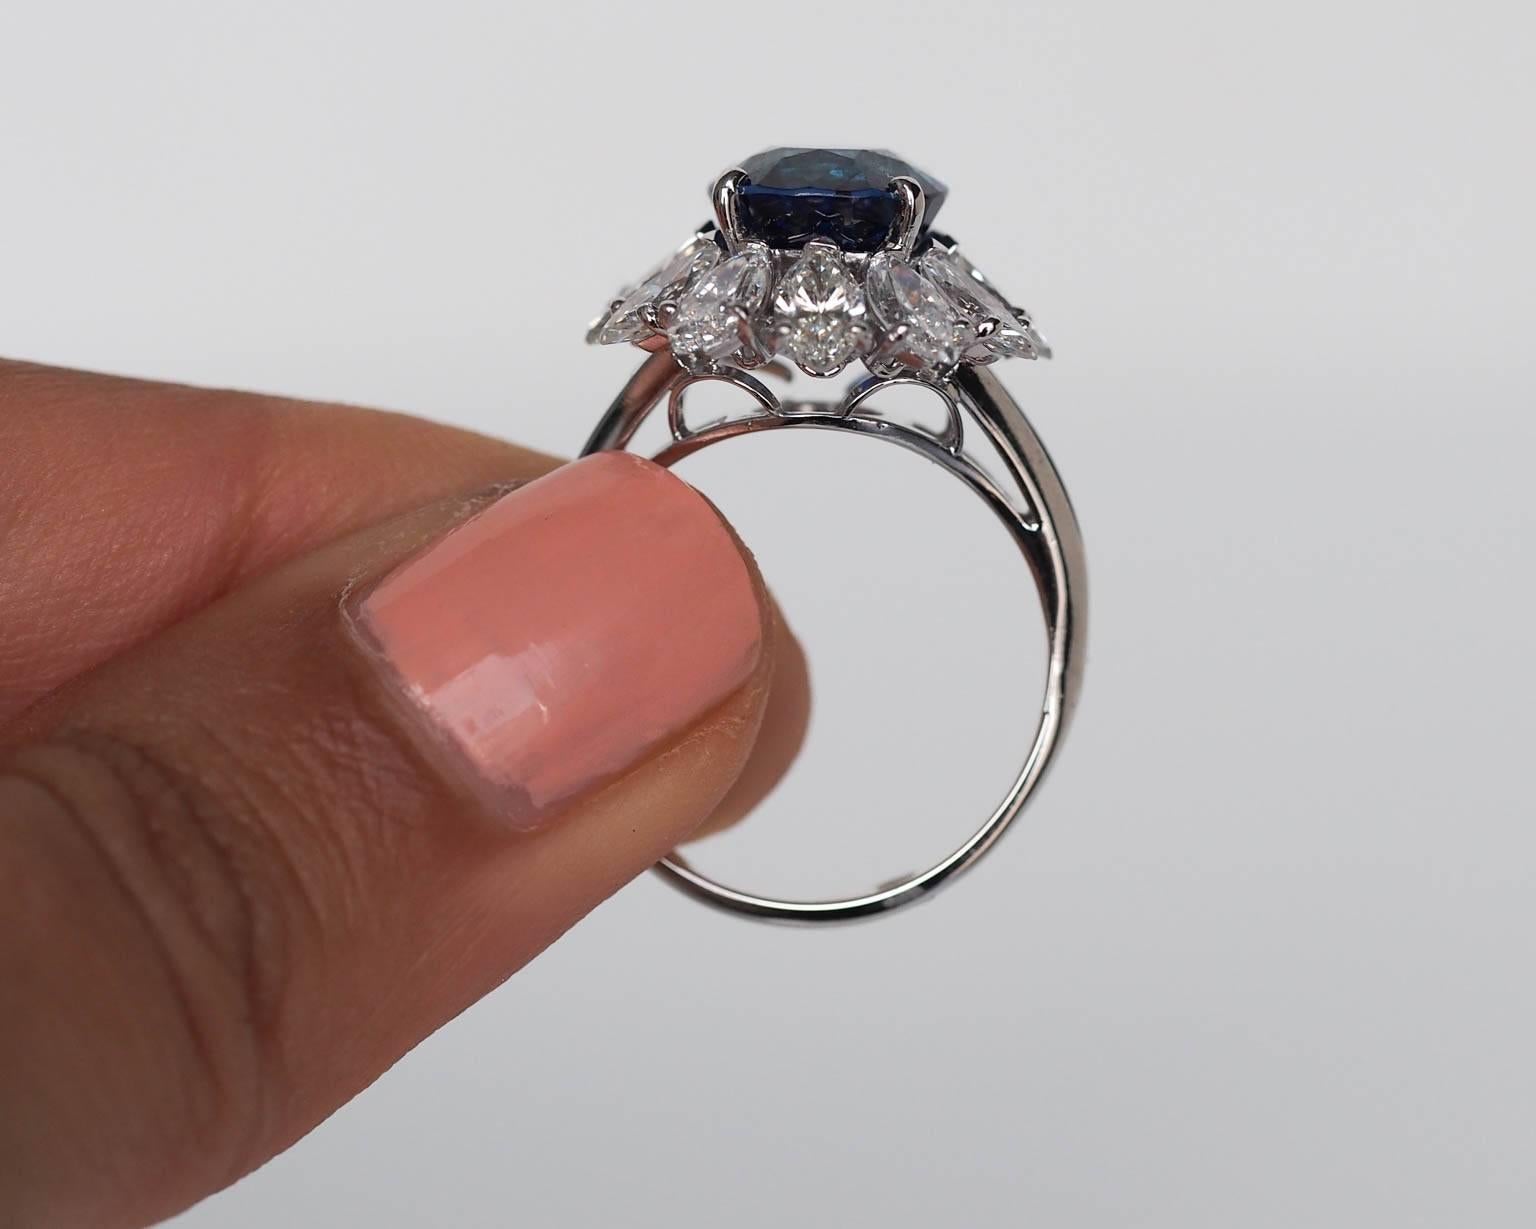 This is an incredibly rare & spectacular piece. This hand made platinum ring features 4 carats of F color VS clarity matching marquise cut diamonds as a halo around the center stone. These high quality diamonds create a 